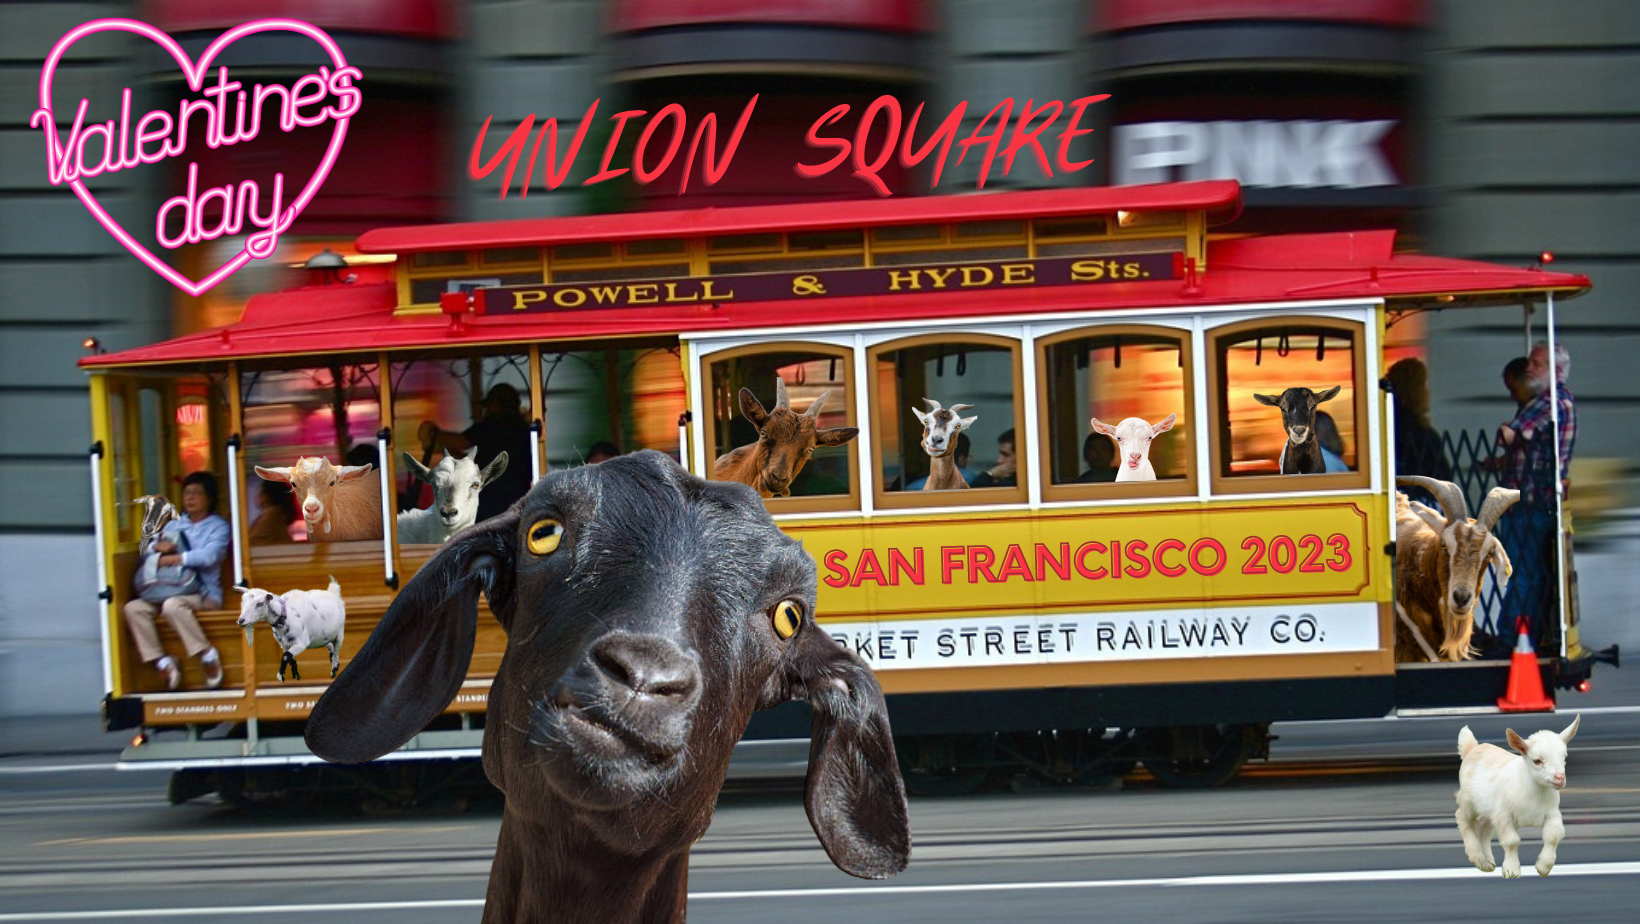 What To Know About SF's Valentine's Day Goat Fashion Show